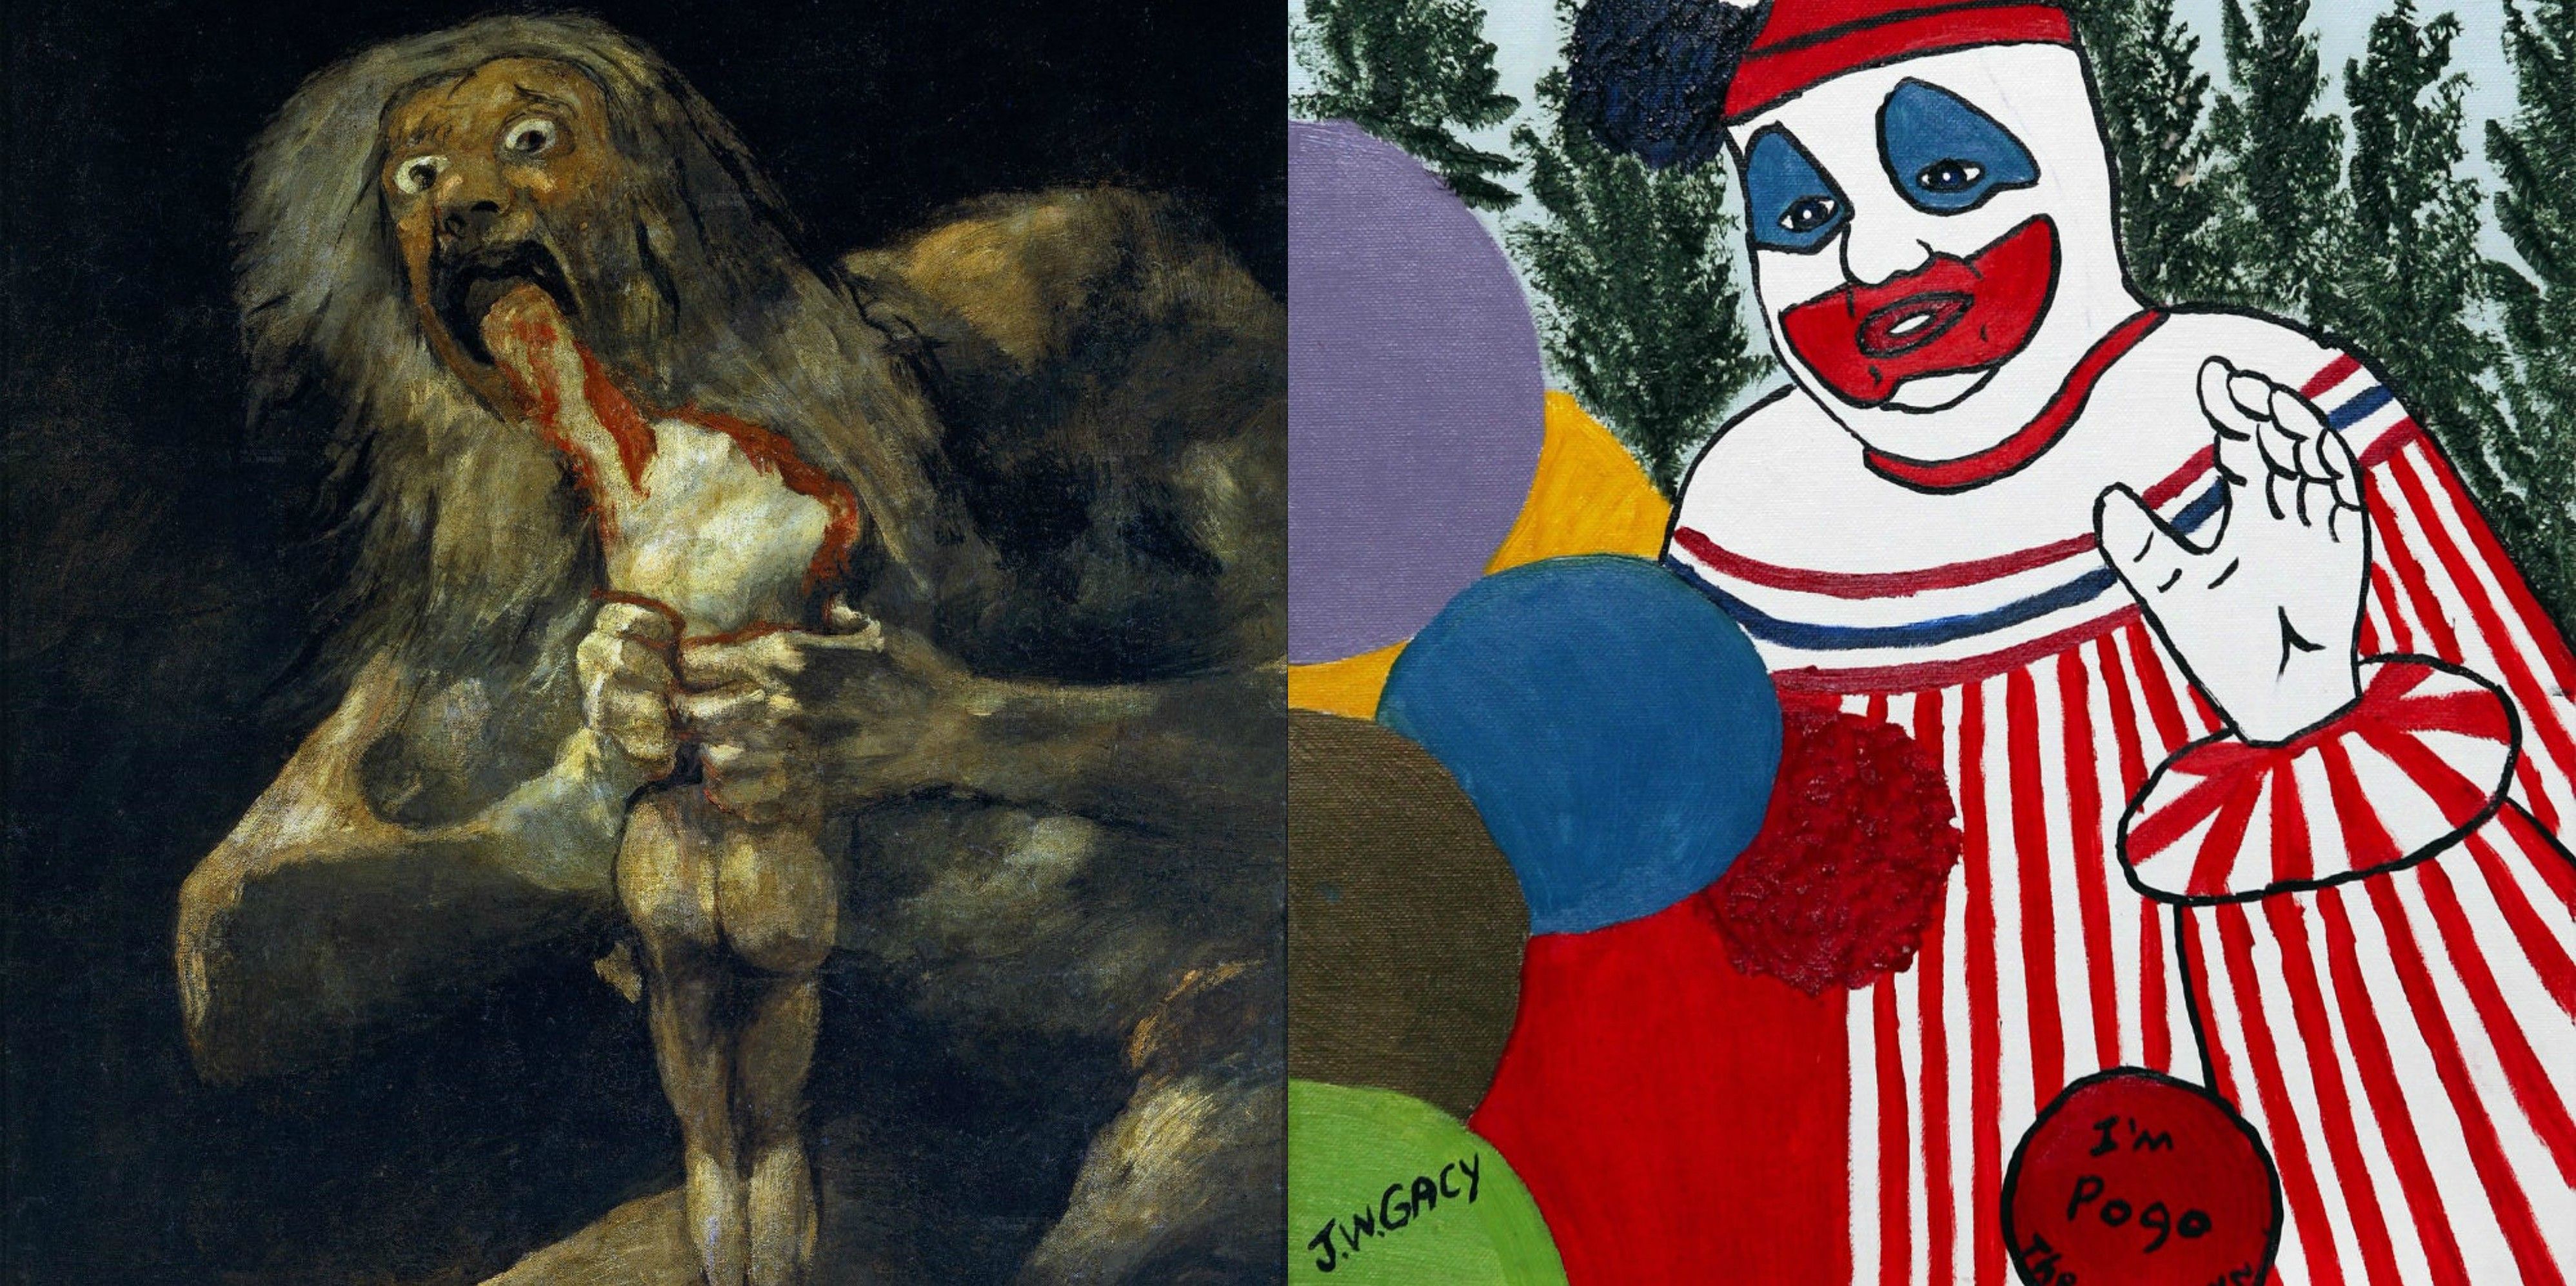 15 Disturbing Facts That Will Leave You Creeped Out Creepy Gallery ...